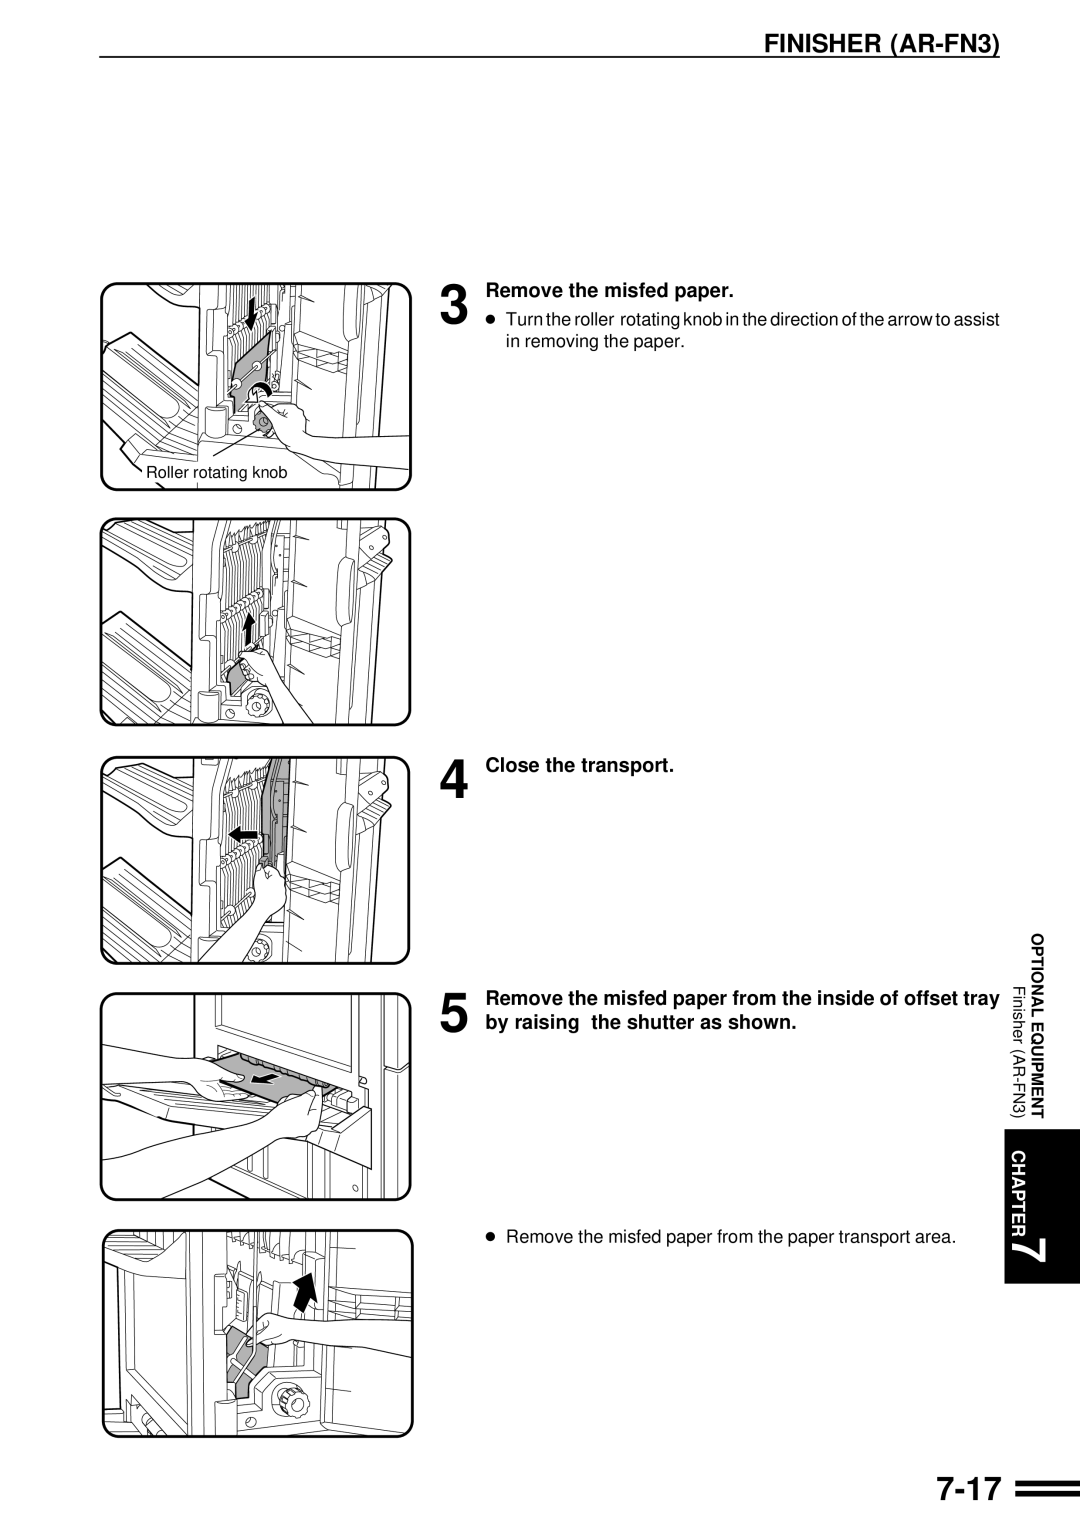 Sharp AR-507 7-17, FINISHER AR-FN3, Remove the misfed paper, Close the transport, by raising the shutter as shown 